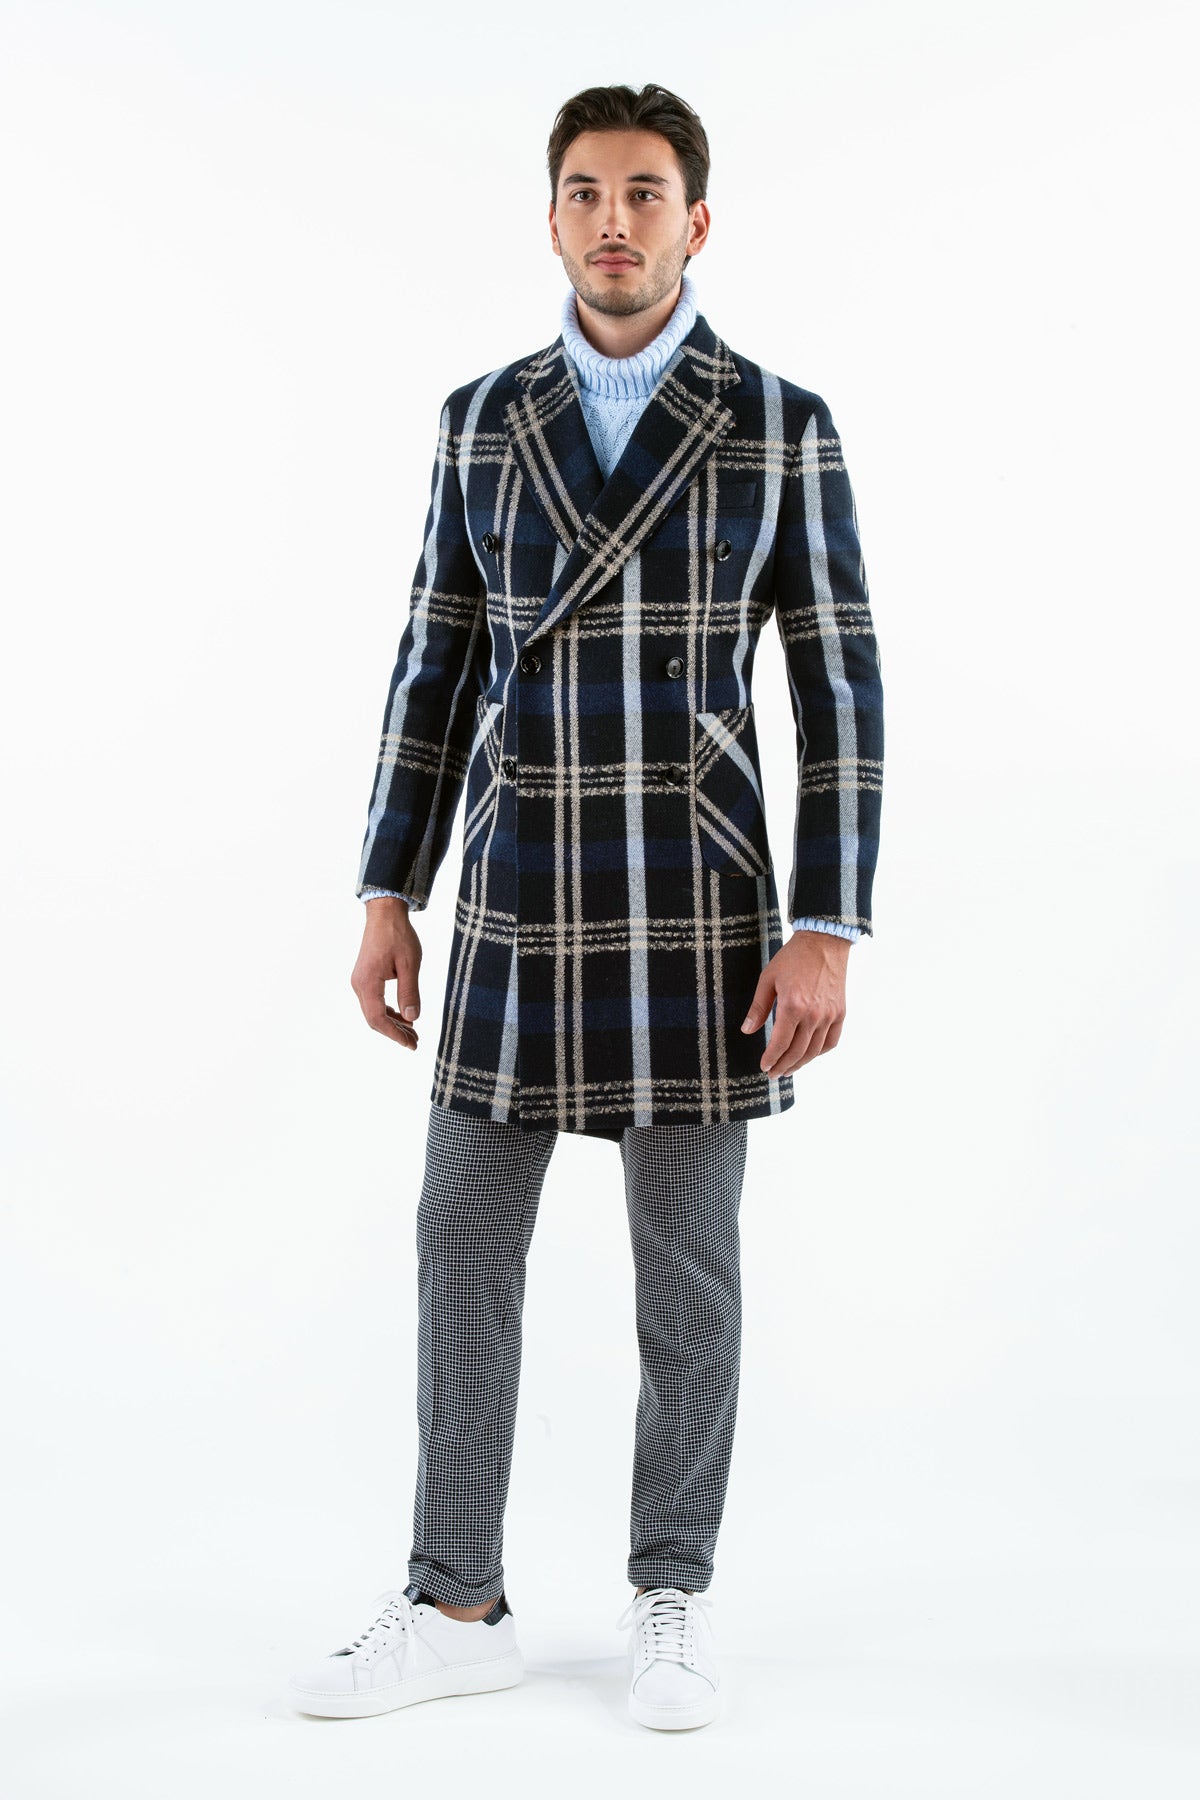 Dark Brown Checked Coat in Raw Wool 